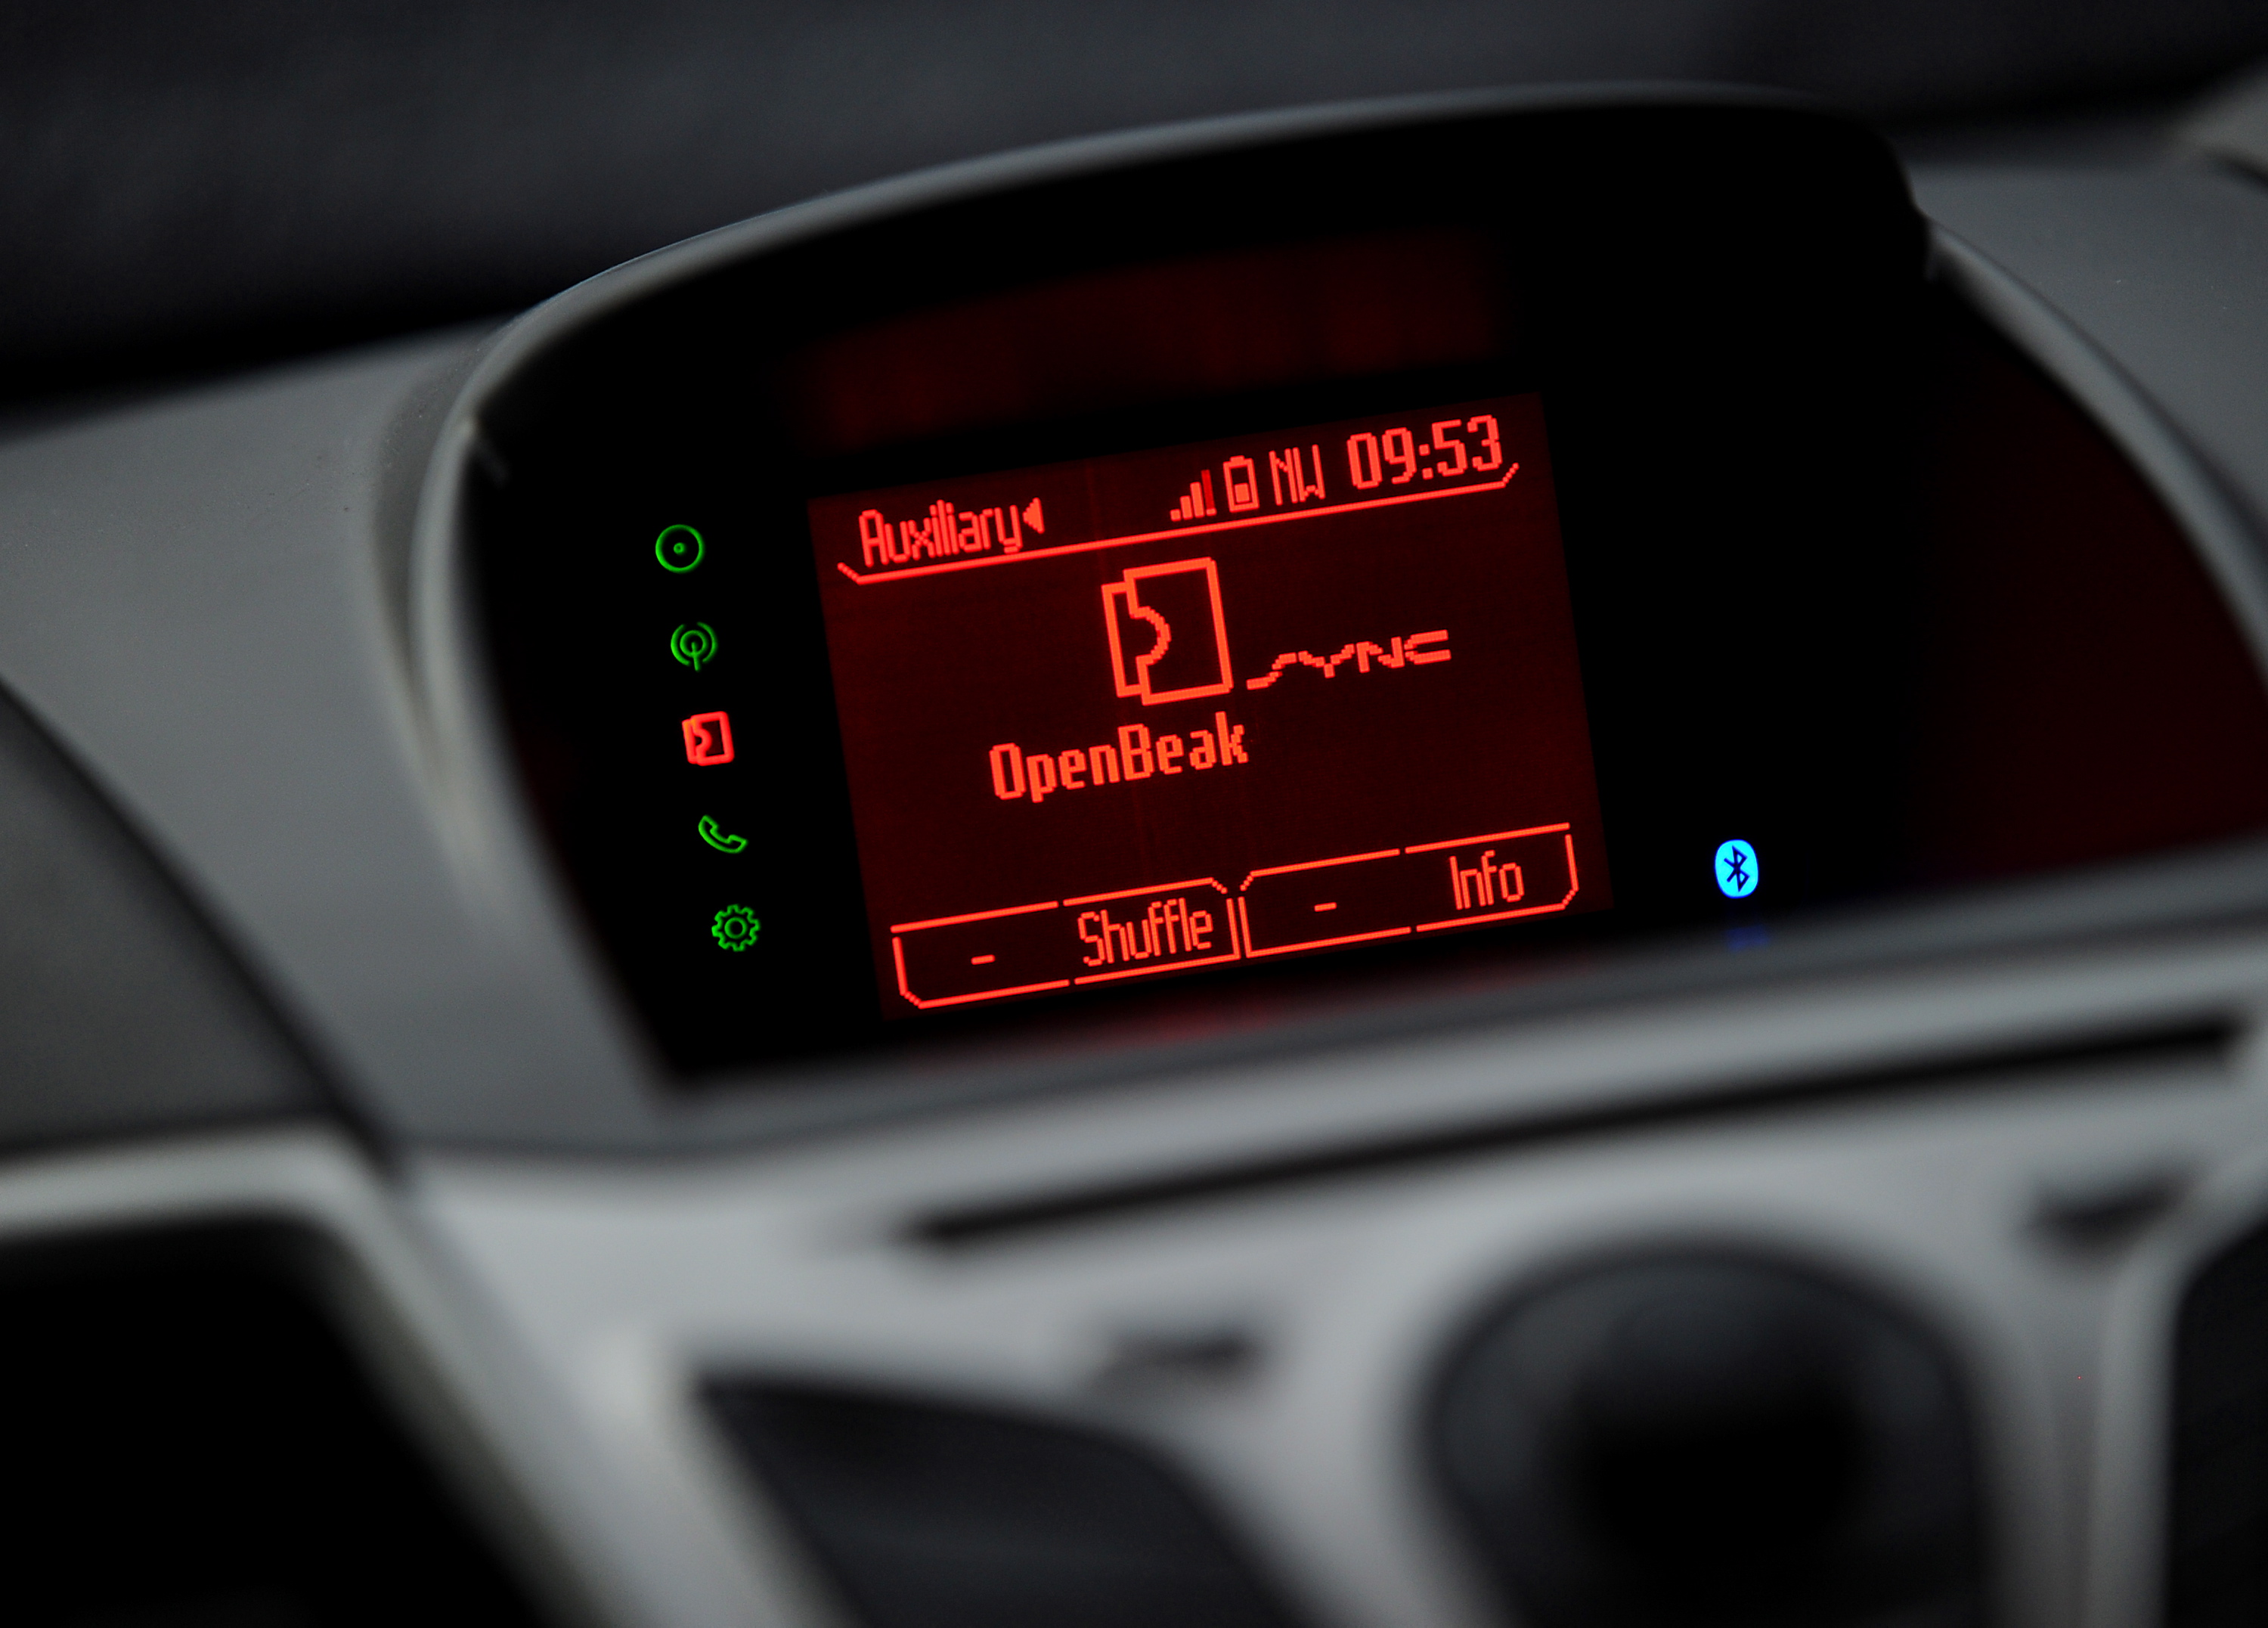 2011 Ford Fiesta to Receive New SYNC AppLink Cabability